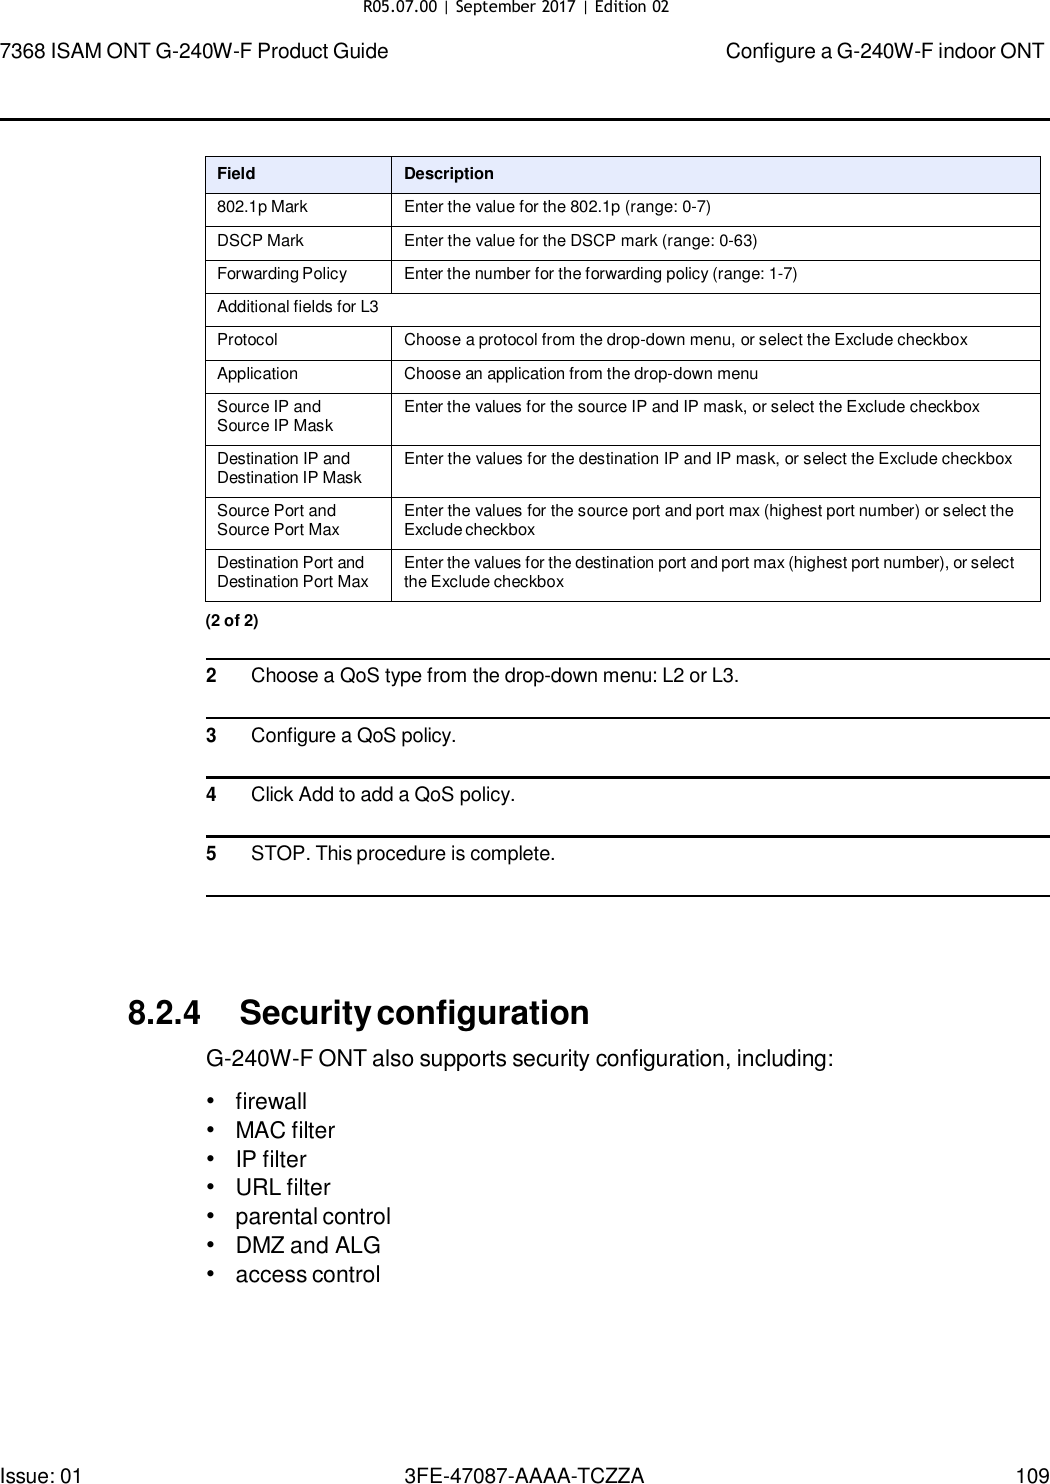 Page 103 of Nokia Bell G240WFV2 7368 ISAM GPON ONU User Manual 7368 ISAM ONT G 240W F Product Guide